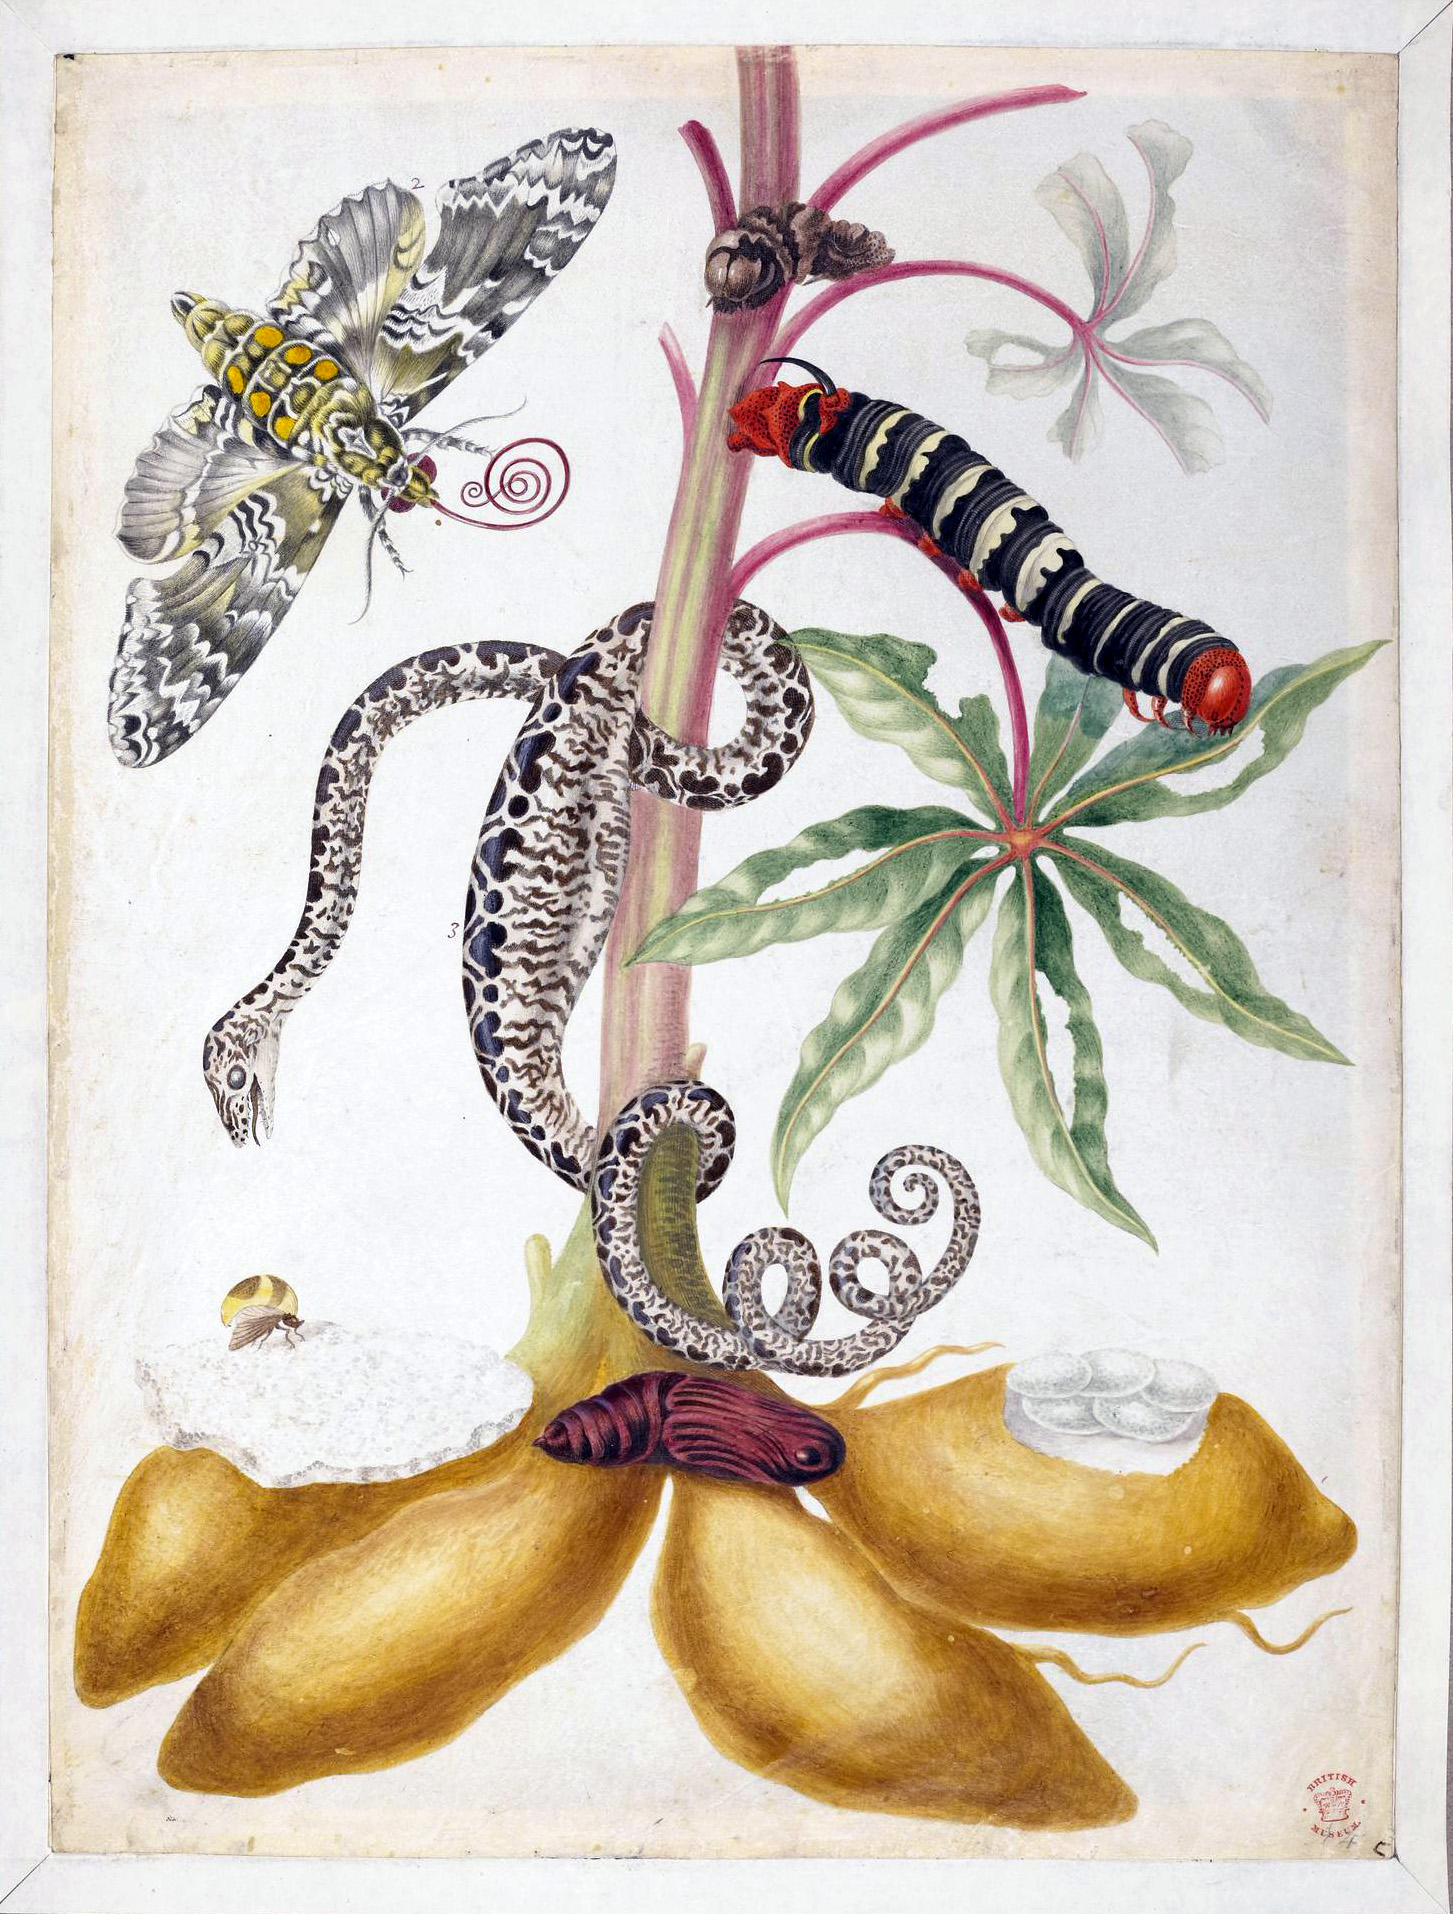 Maria Sibylla Merian, an introduction picture